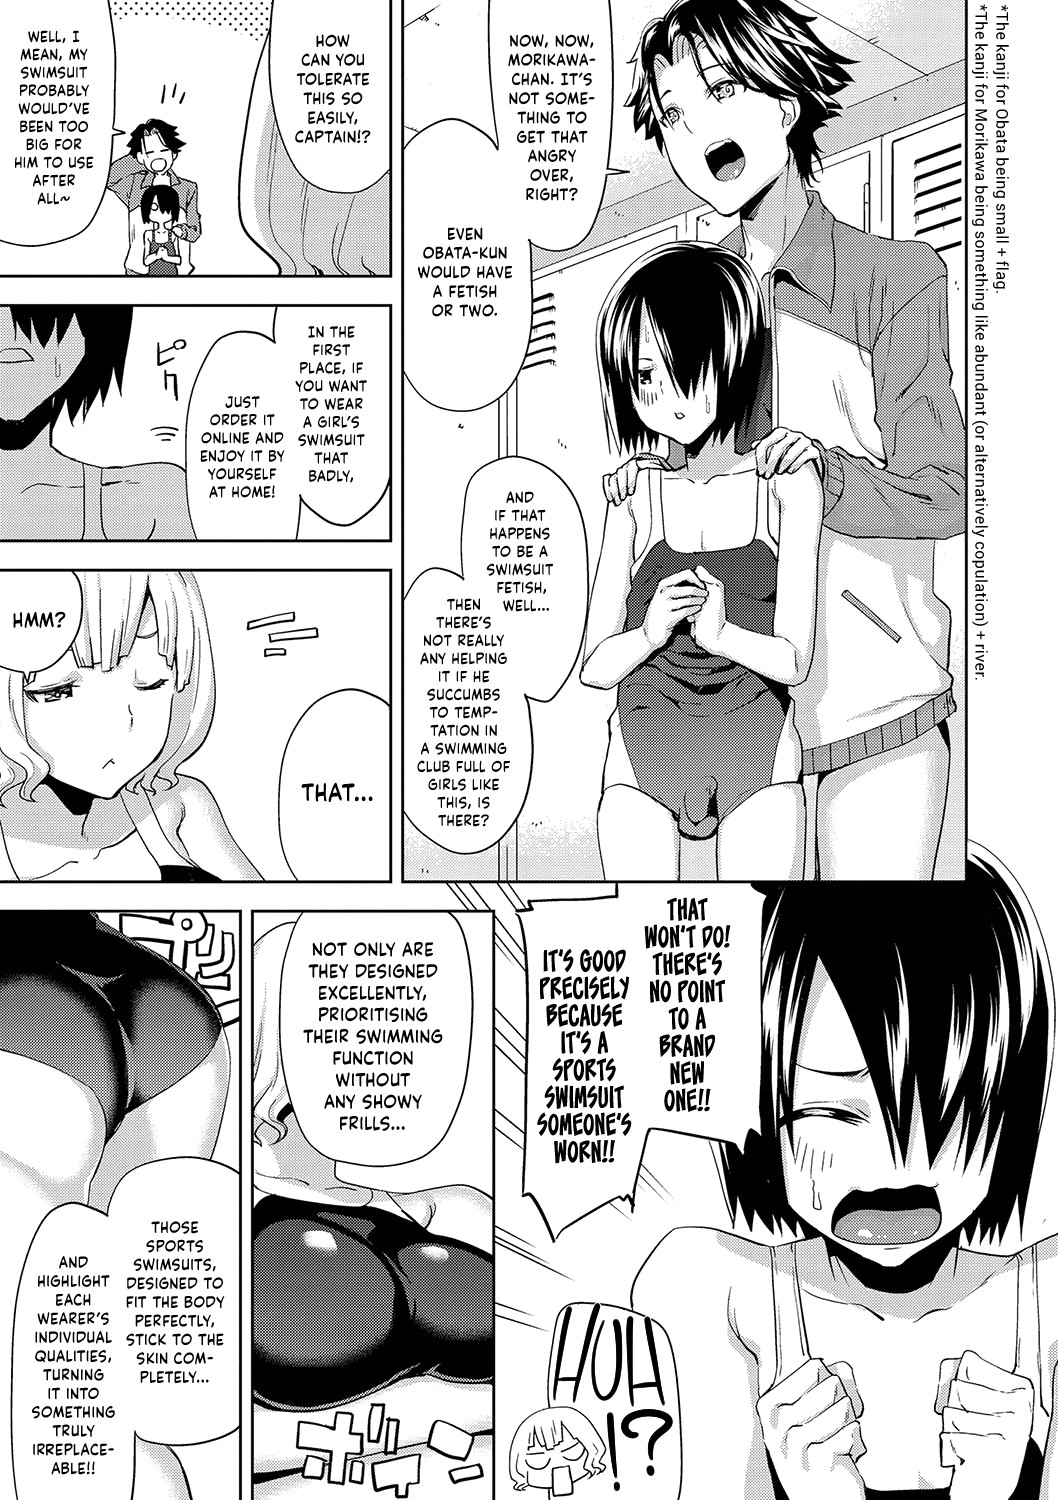 Hentai Manga Comic-Girls From Point Of View-Chapter 6-8-3